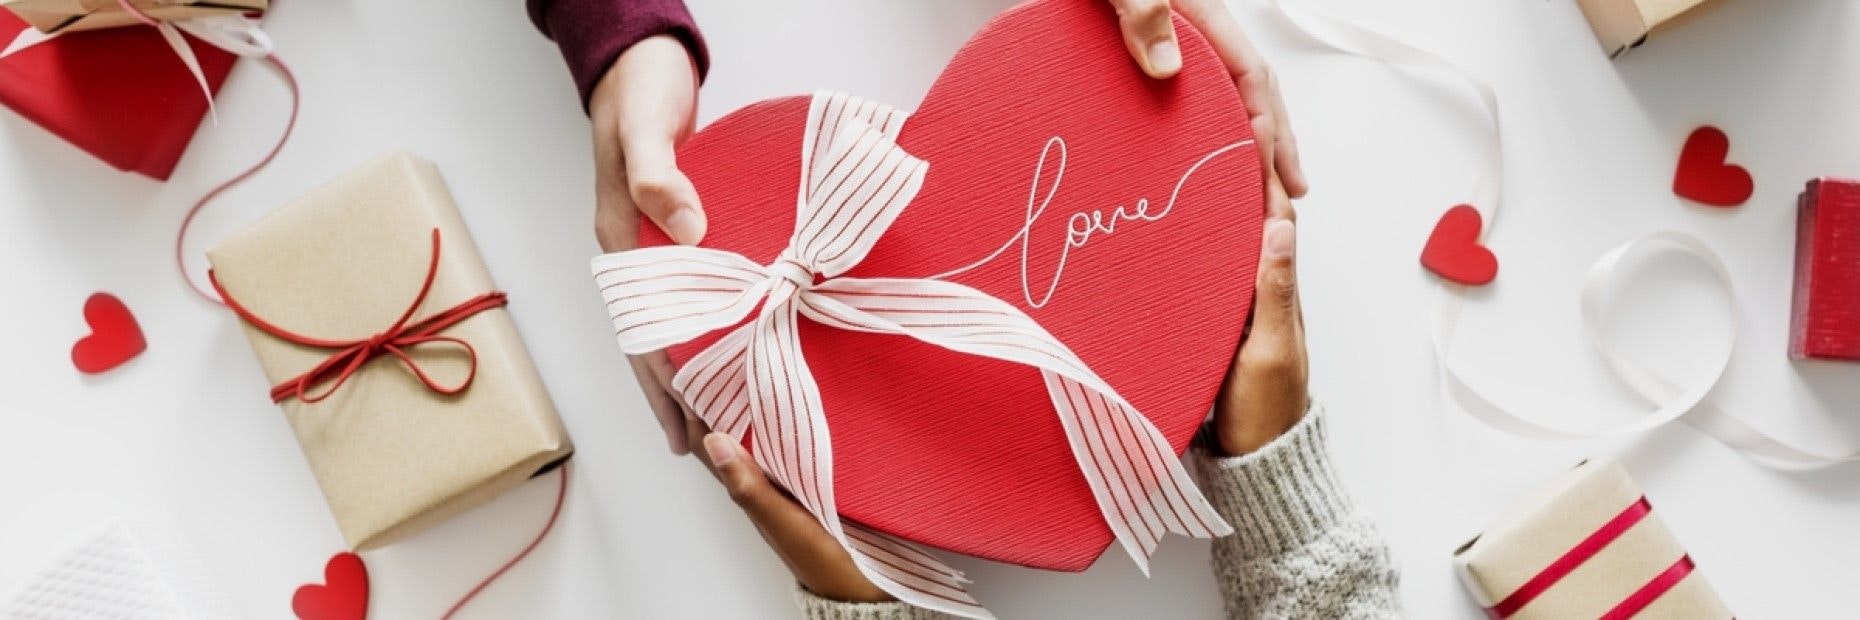 Top 5 Valentines Day gifts for him